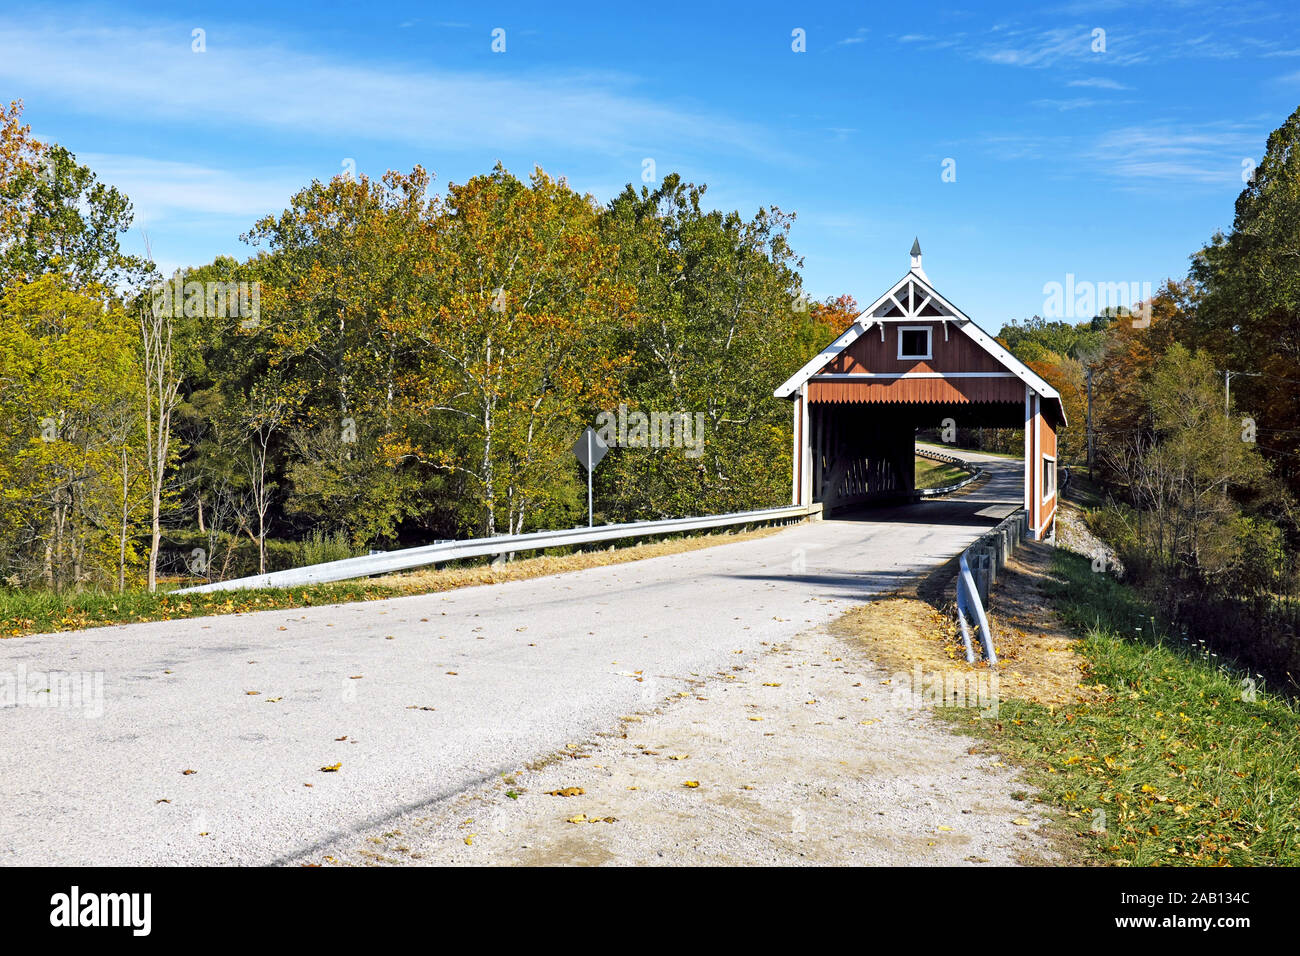 One of 19 covered bridges in Ashtabula County, the Netcher Road wooden covered bridge in Jefferson Township, Ohio, USA is of Neo-Victorian design. Stock Photo